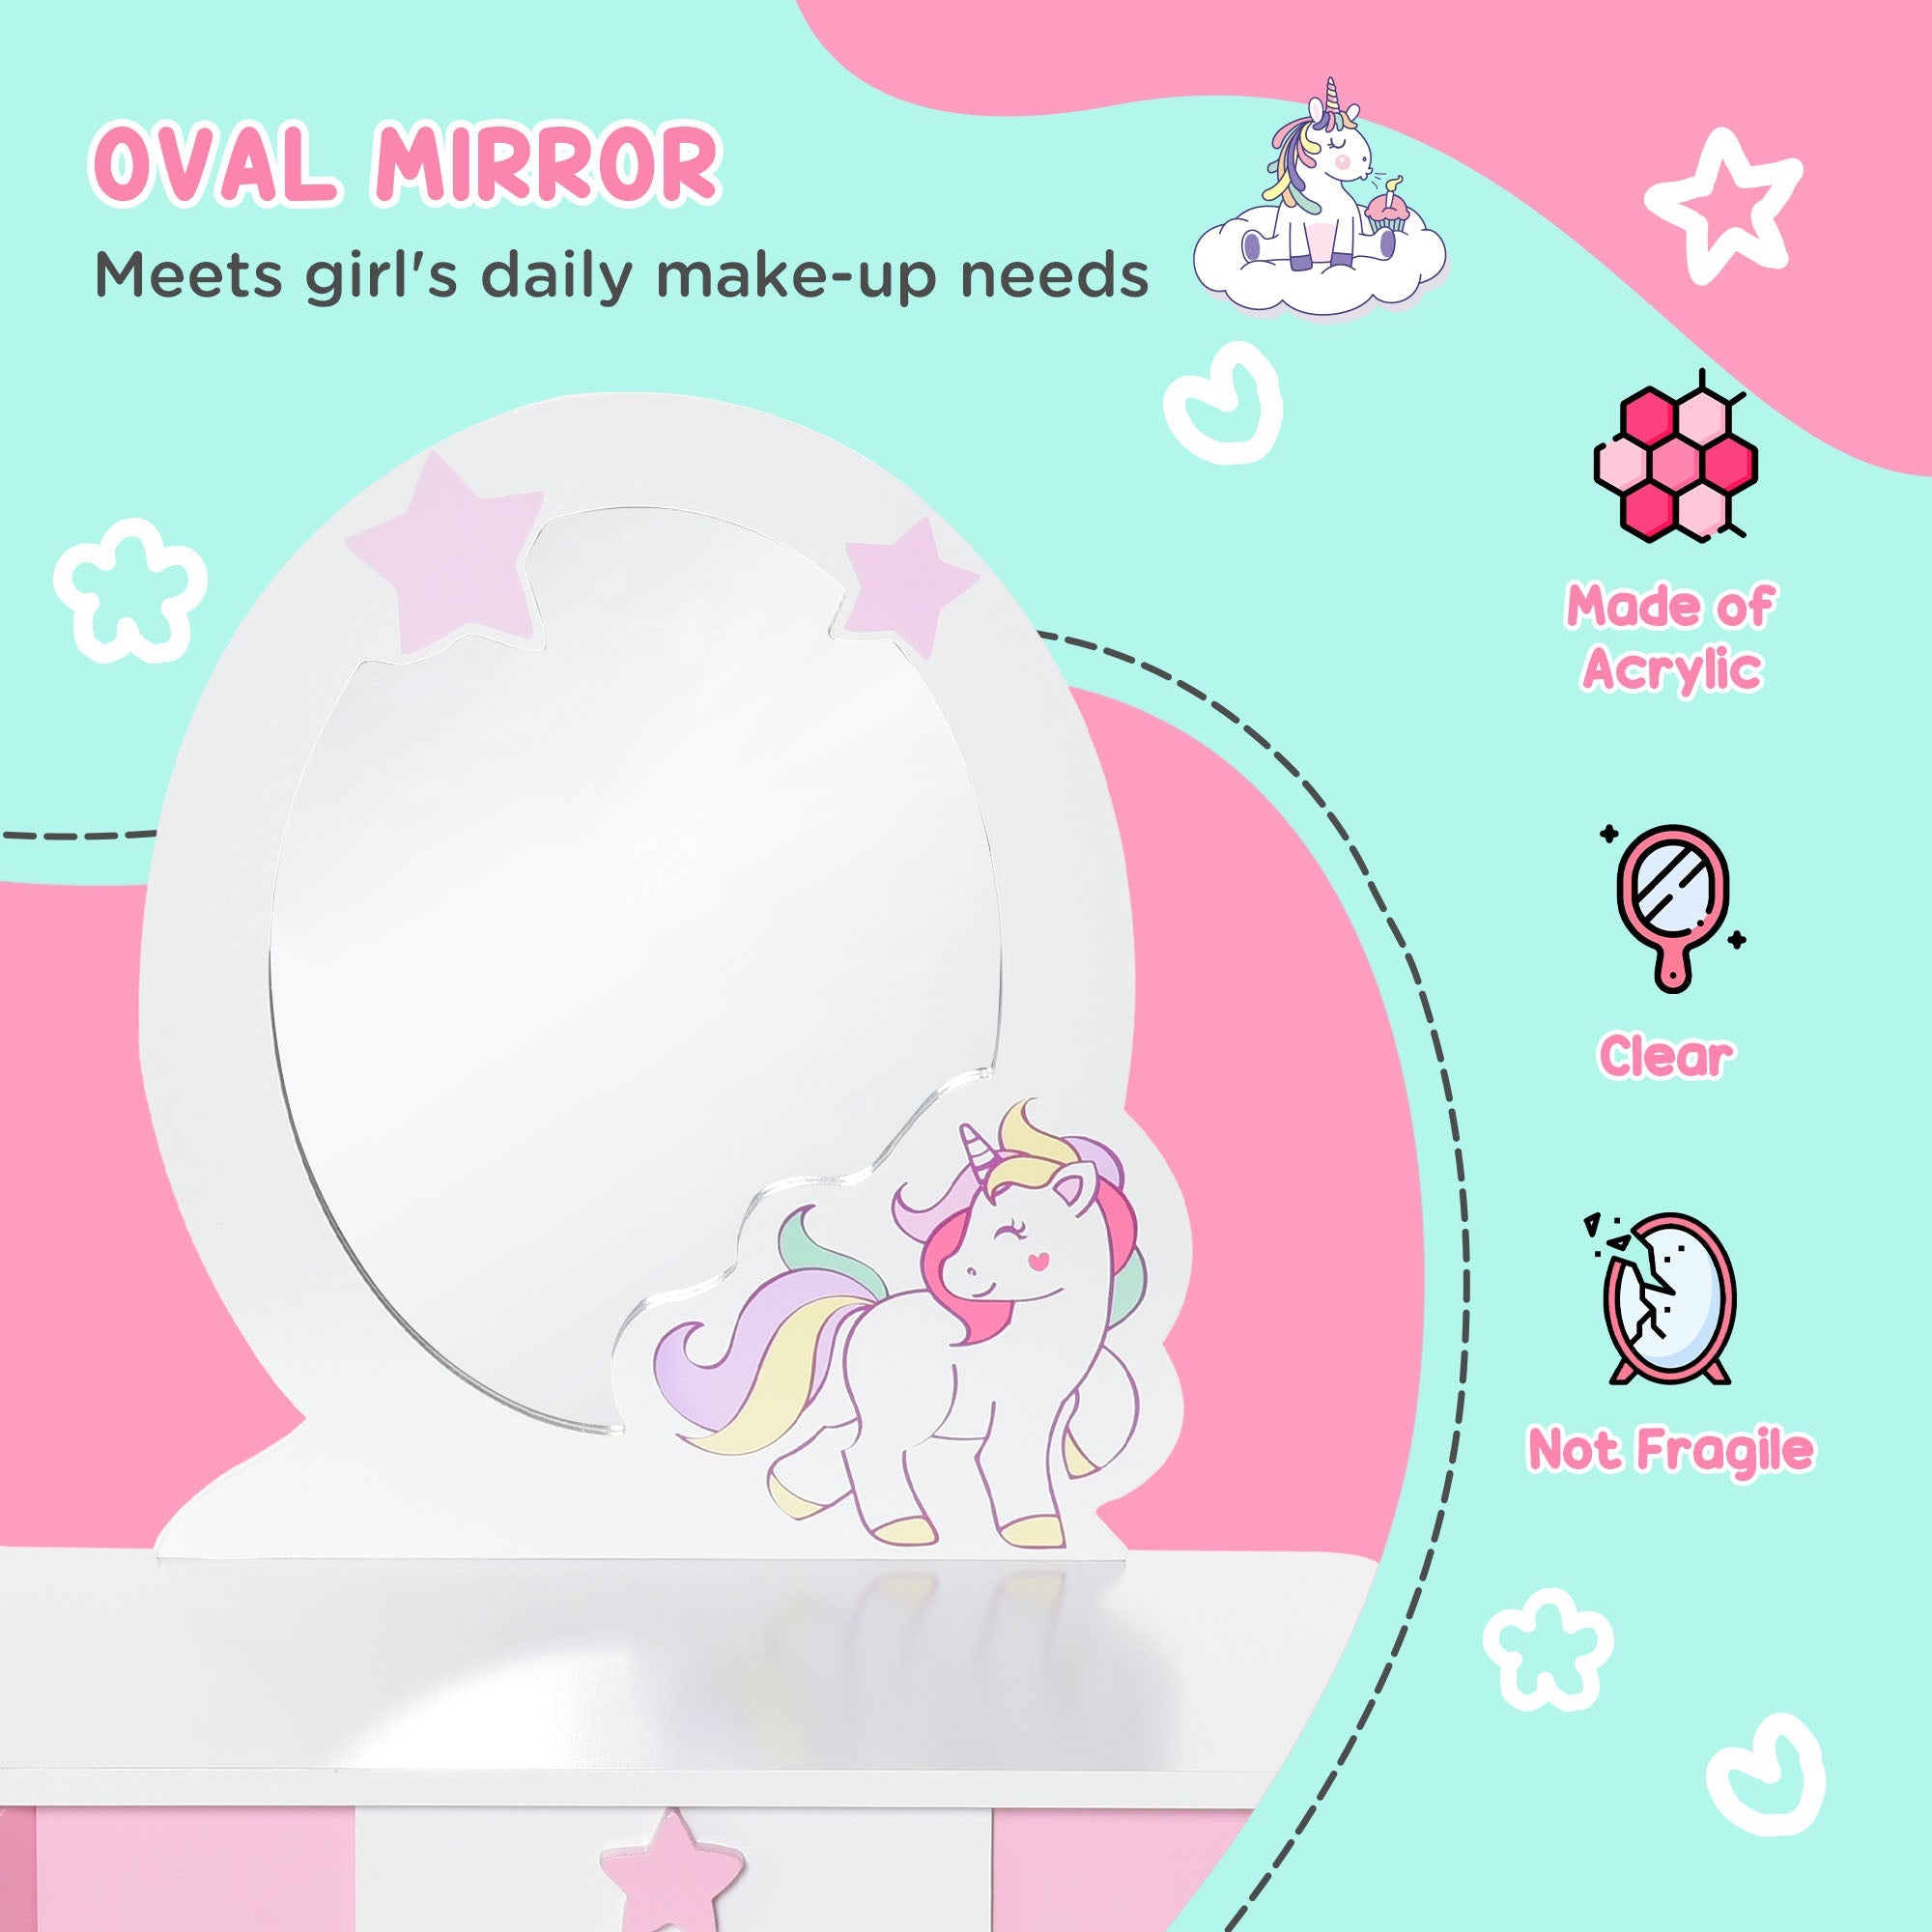 HOMCOM Girls Dressing Table w/ Mirror & Stool, Kids Dressing Table, Unicorn Pretend Play Toy for Toddles Age 3-6 Years, Acrylic Mirror, Pink & White - TovaHaus